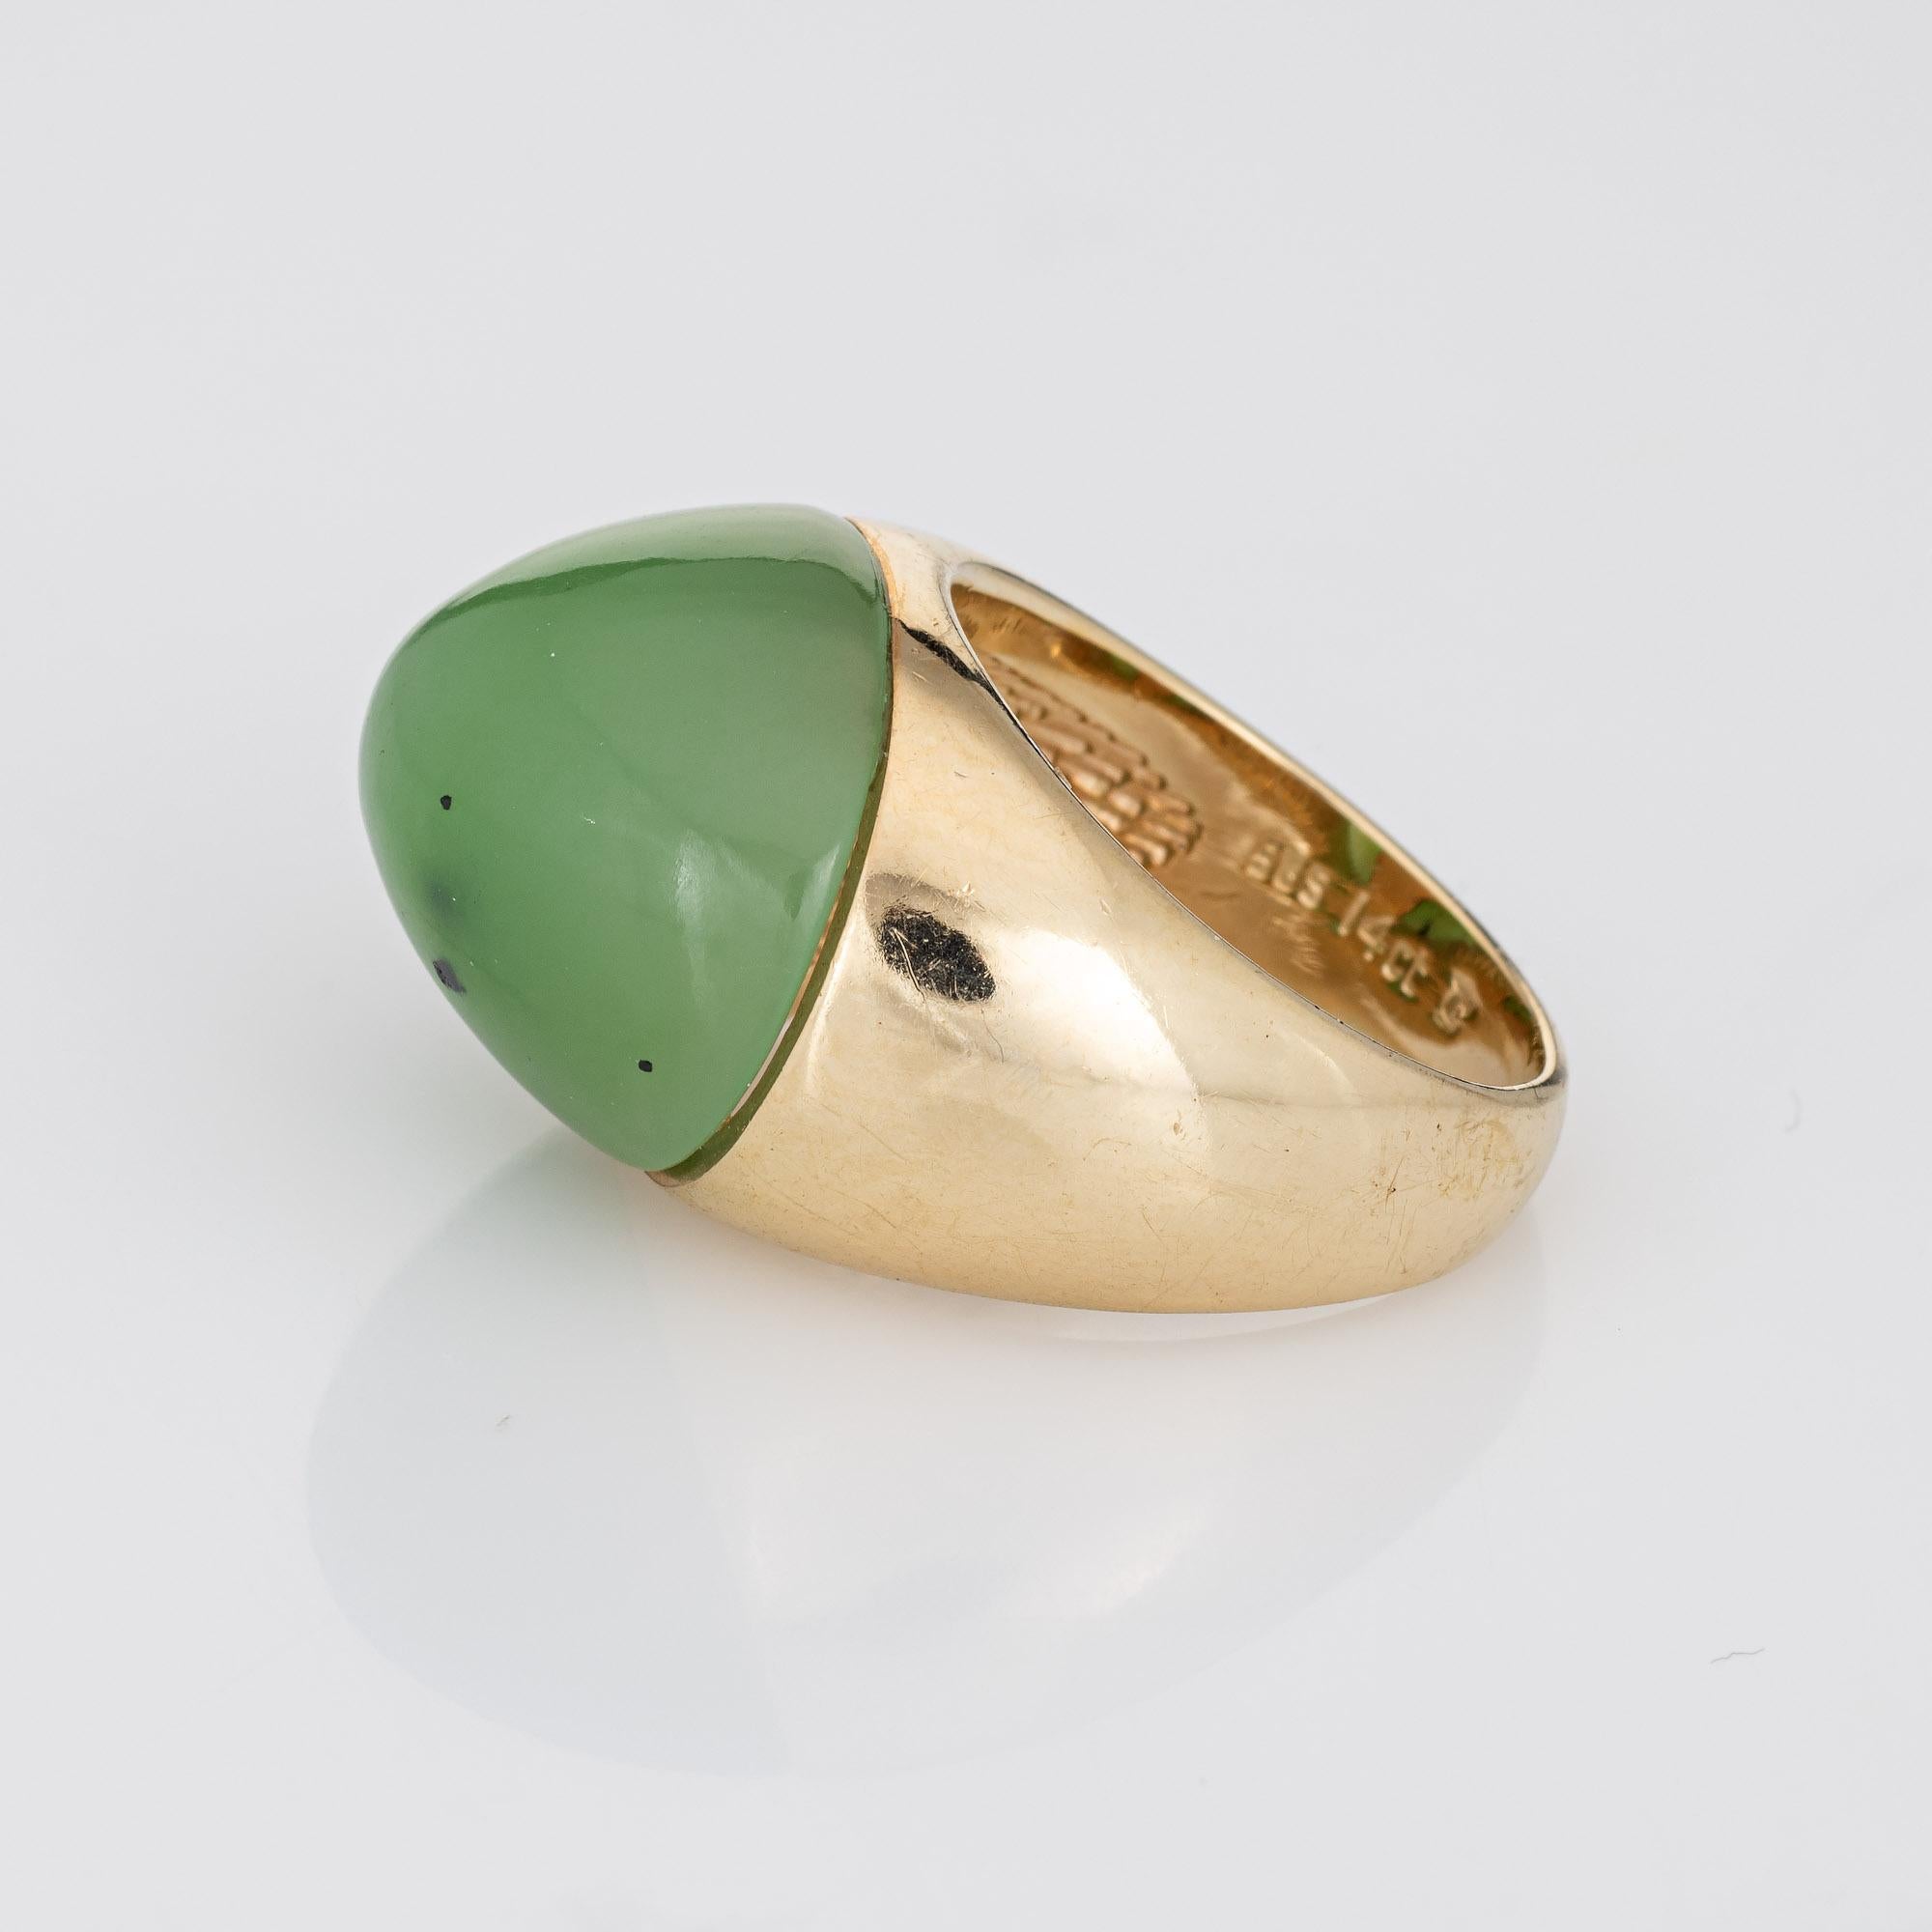 Cabochon Jade Dome Ring Vintage 14k Yellow Gold Estate Fine Cocktail Jewelry